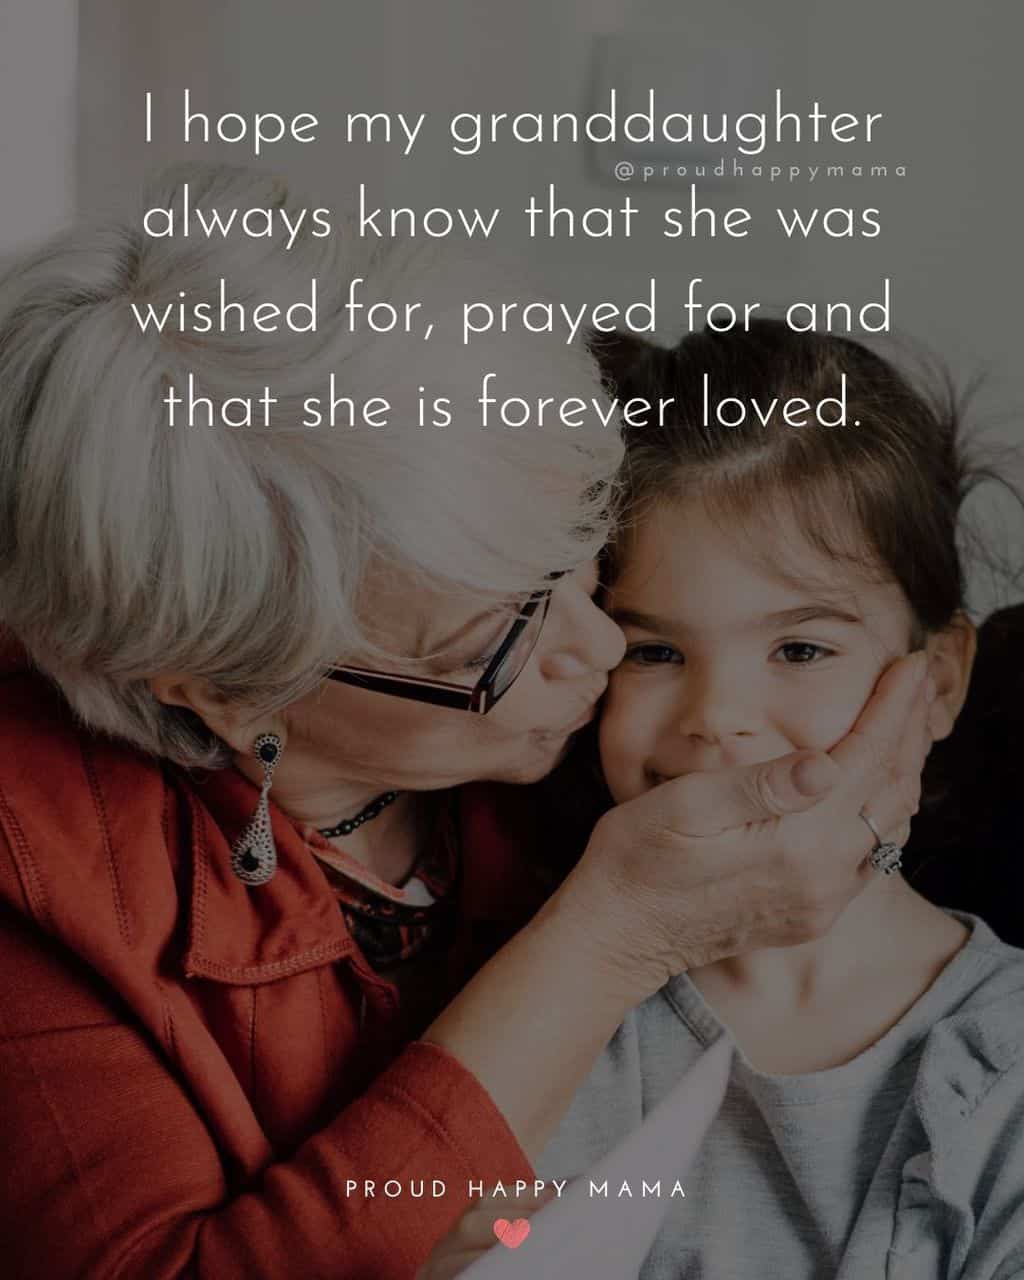 Granddaughter Quotes - I hope my granddaughter always know that she was wished for, prayed for and that she is forever loved.’